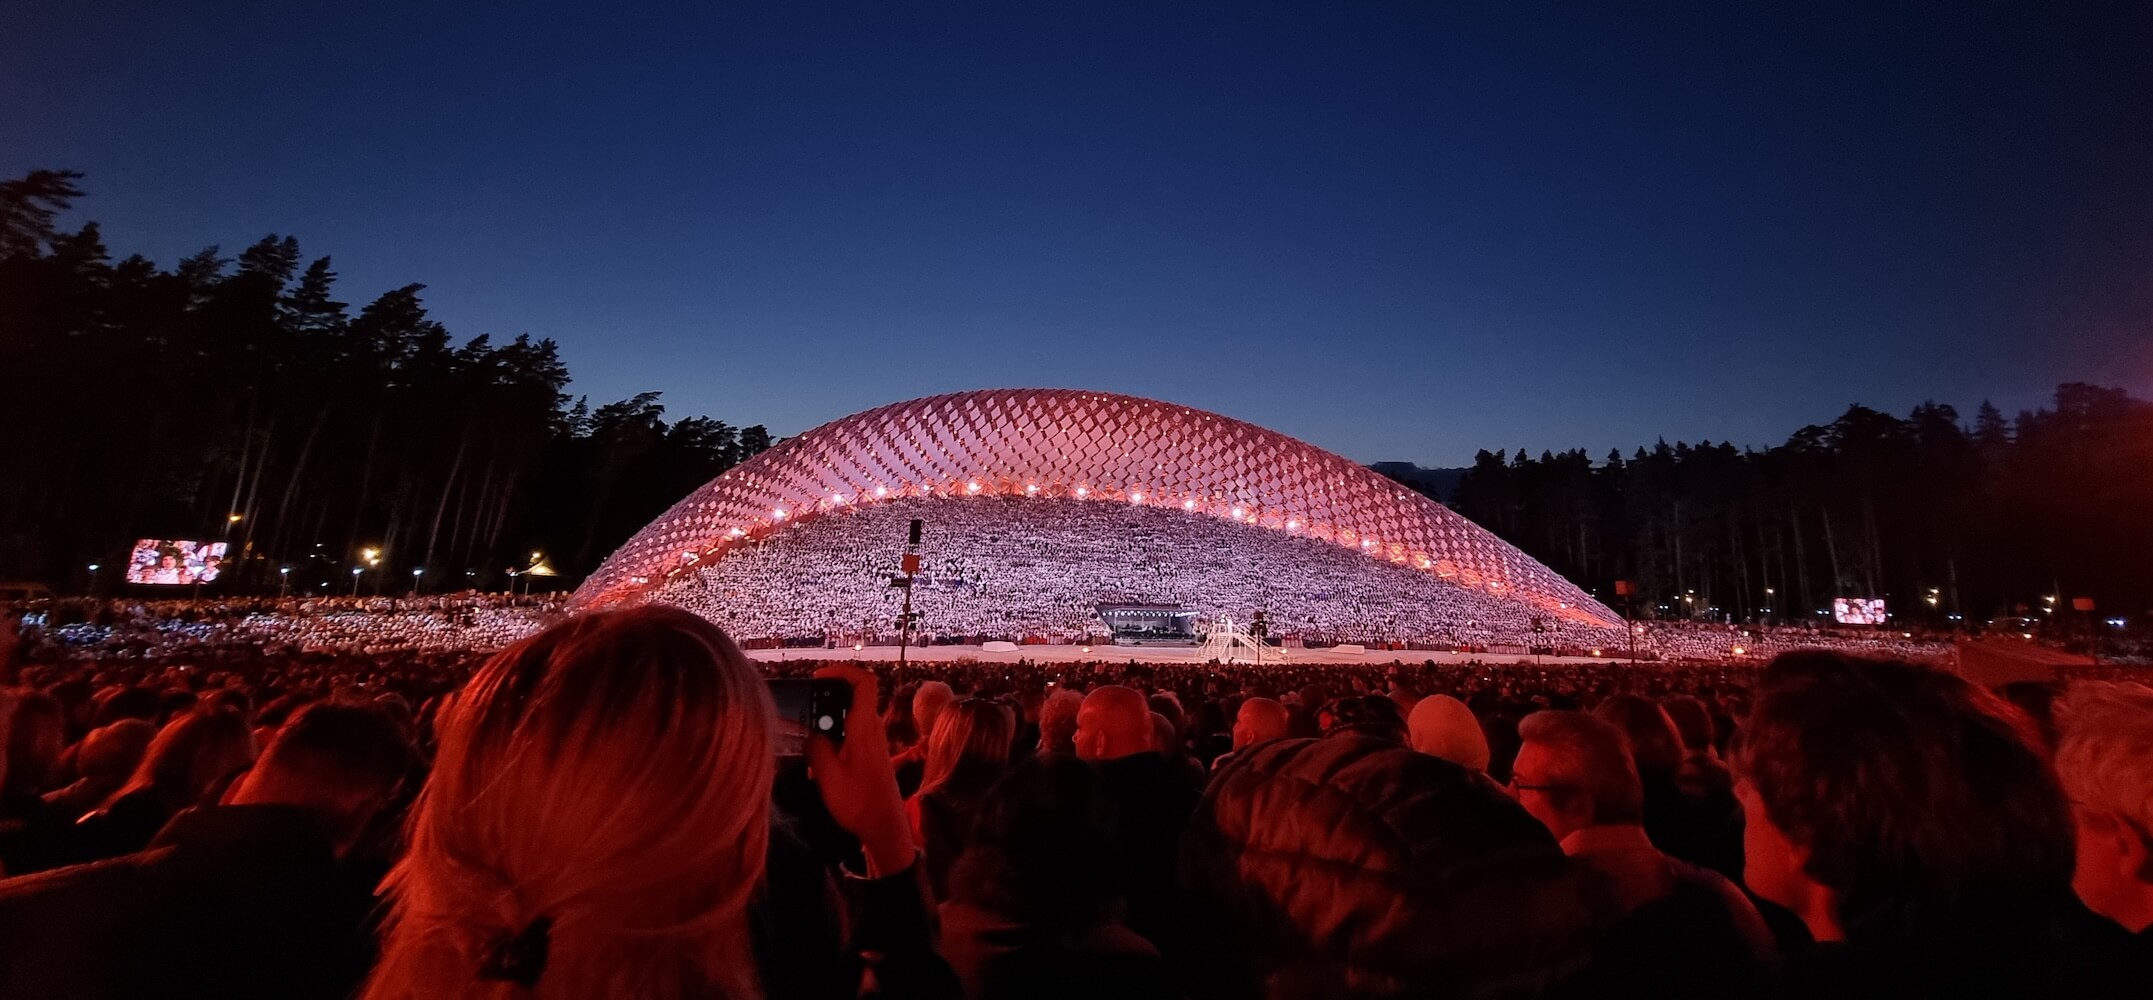 The main stage of the final concert, with a choir of 16,000 people